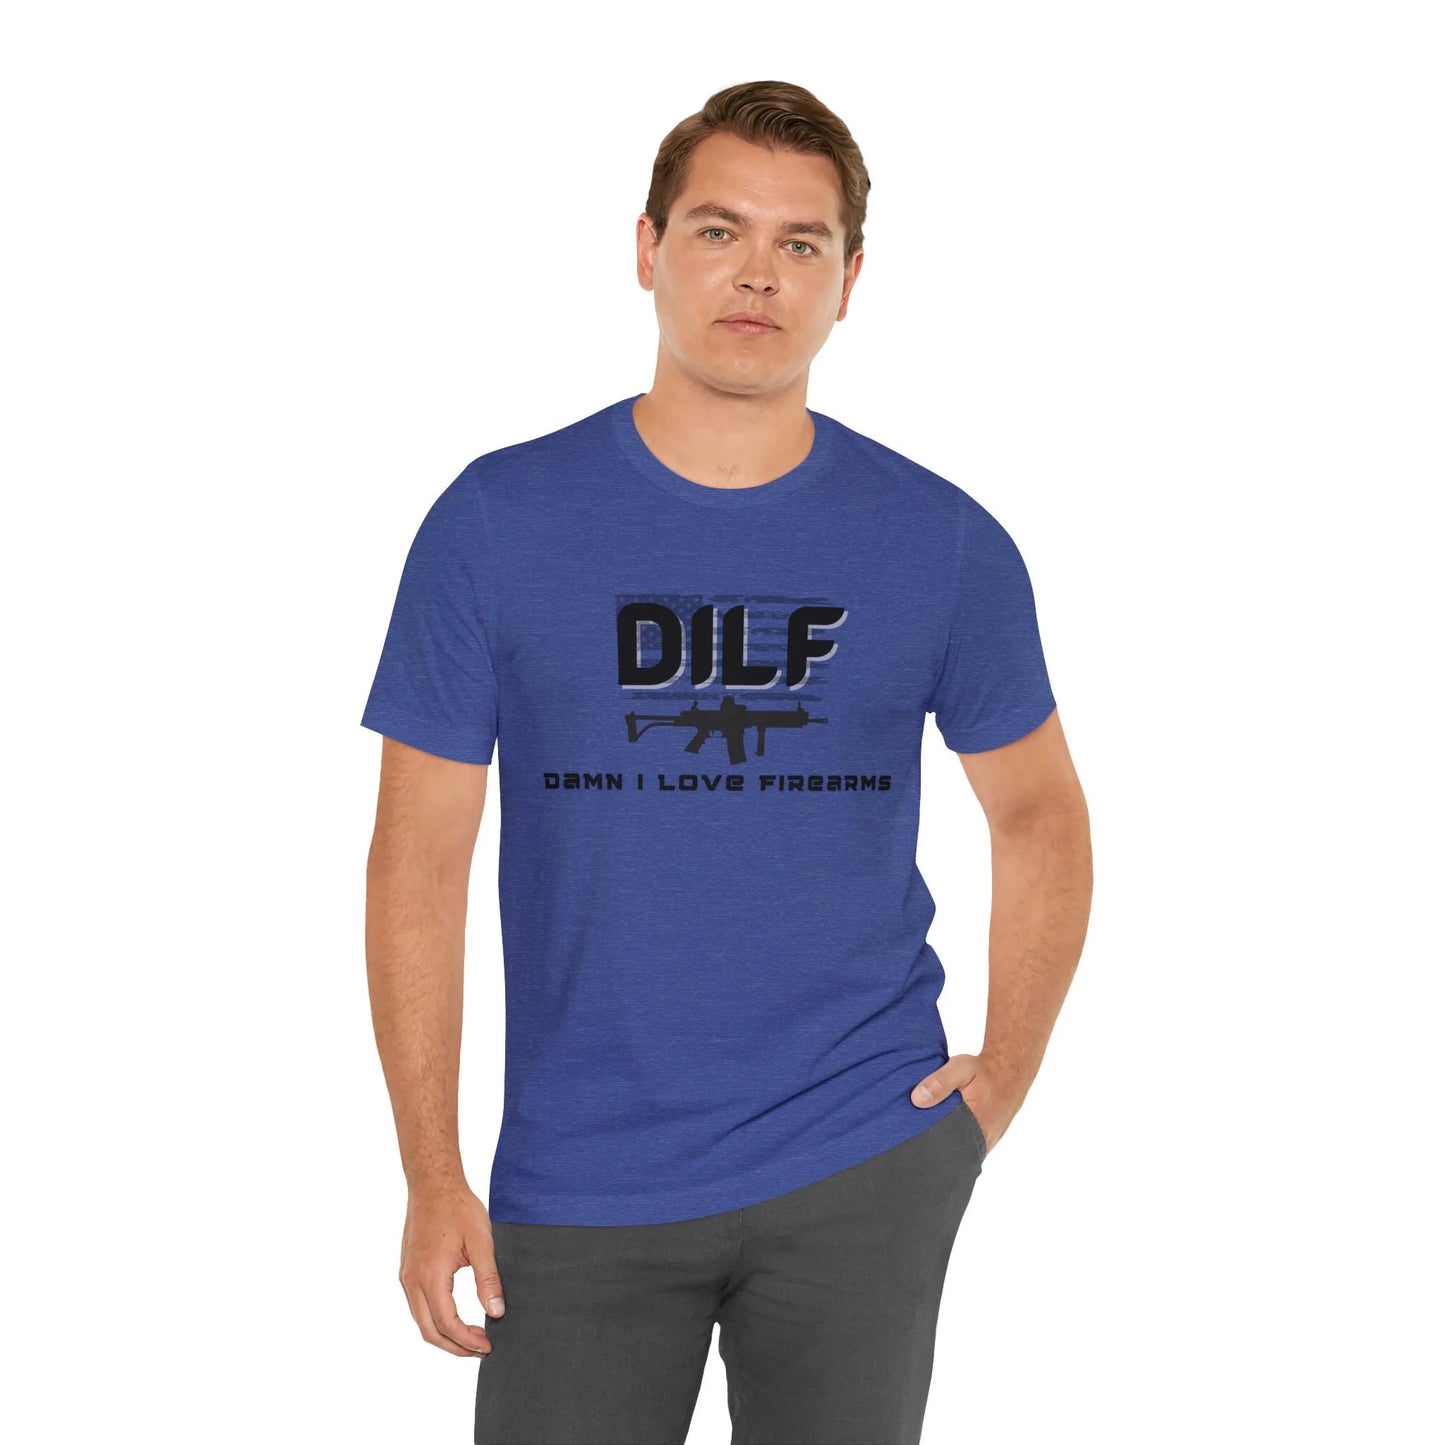 DILF Shirt, Firearm Dad T-Shirt, Gift For Him, Gift For Dad